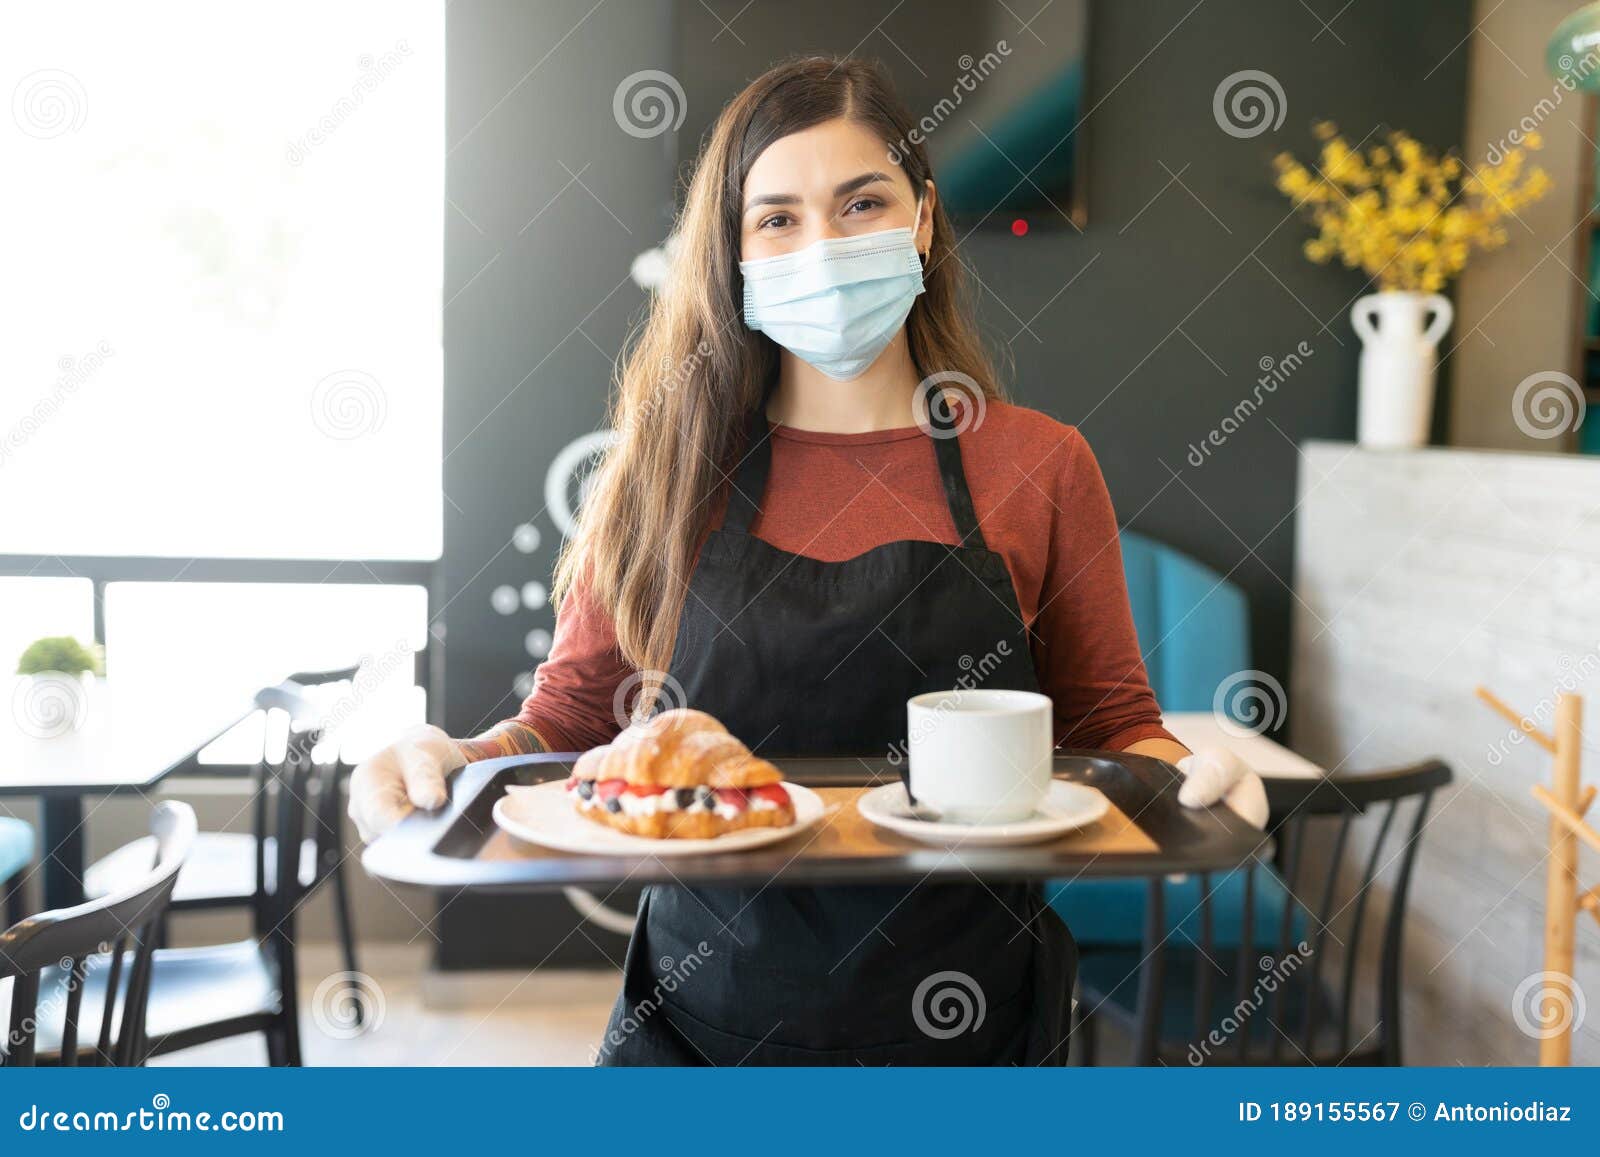 female server with order in tray at cafe